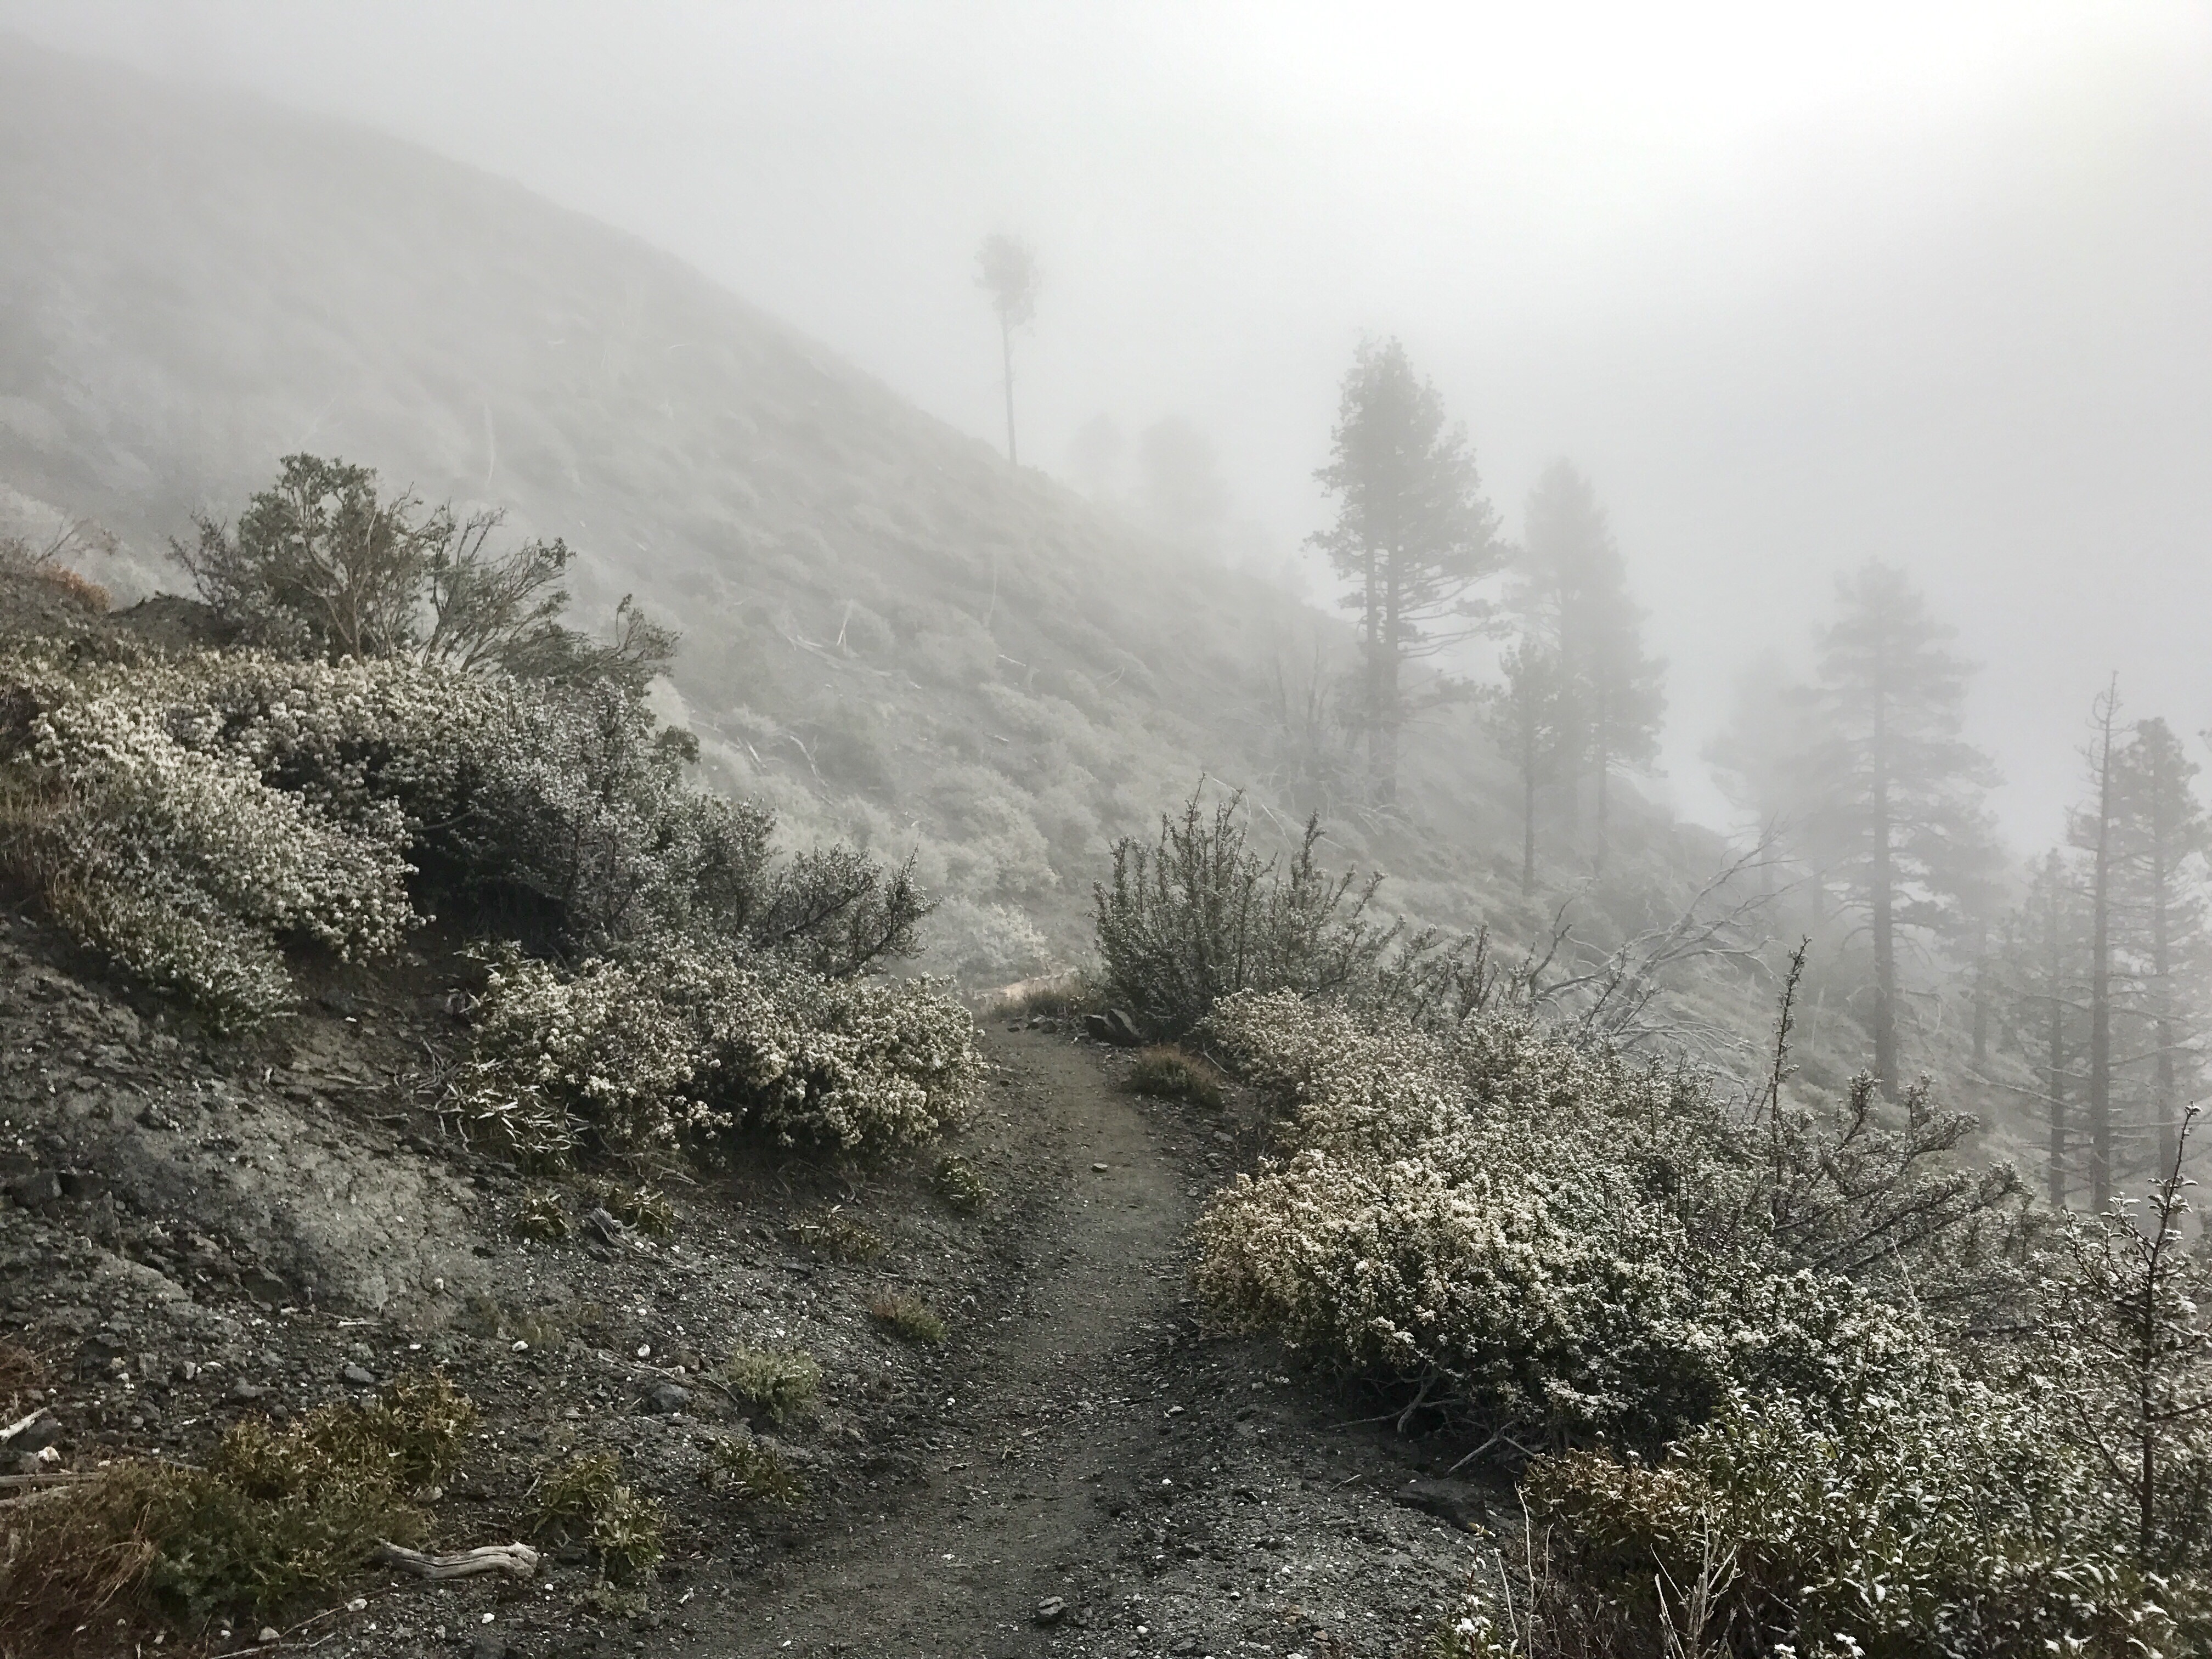 PCT Day 32 – Hiking in Snow to Wrightwood